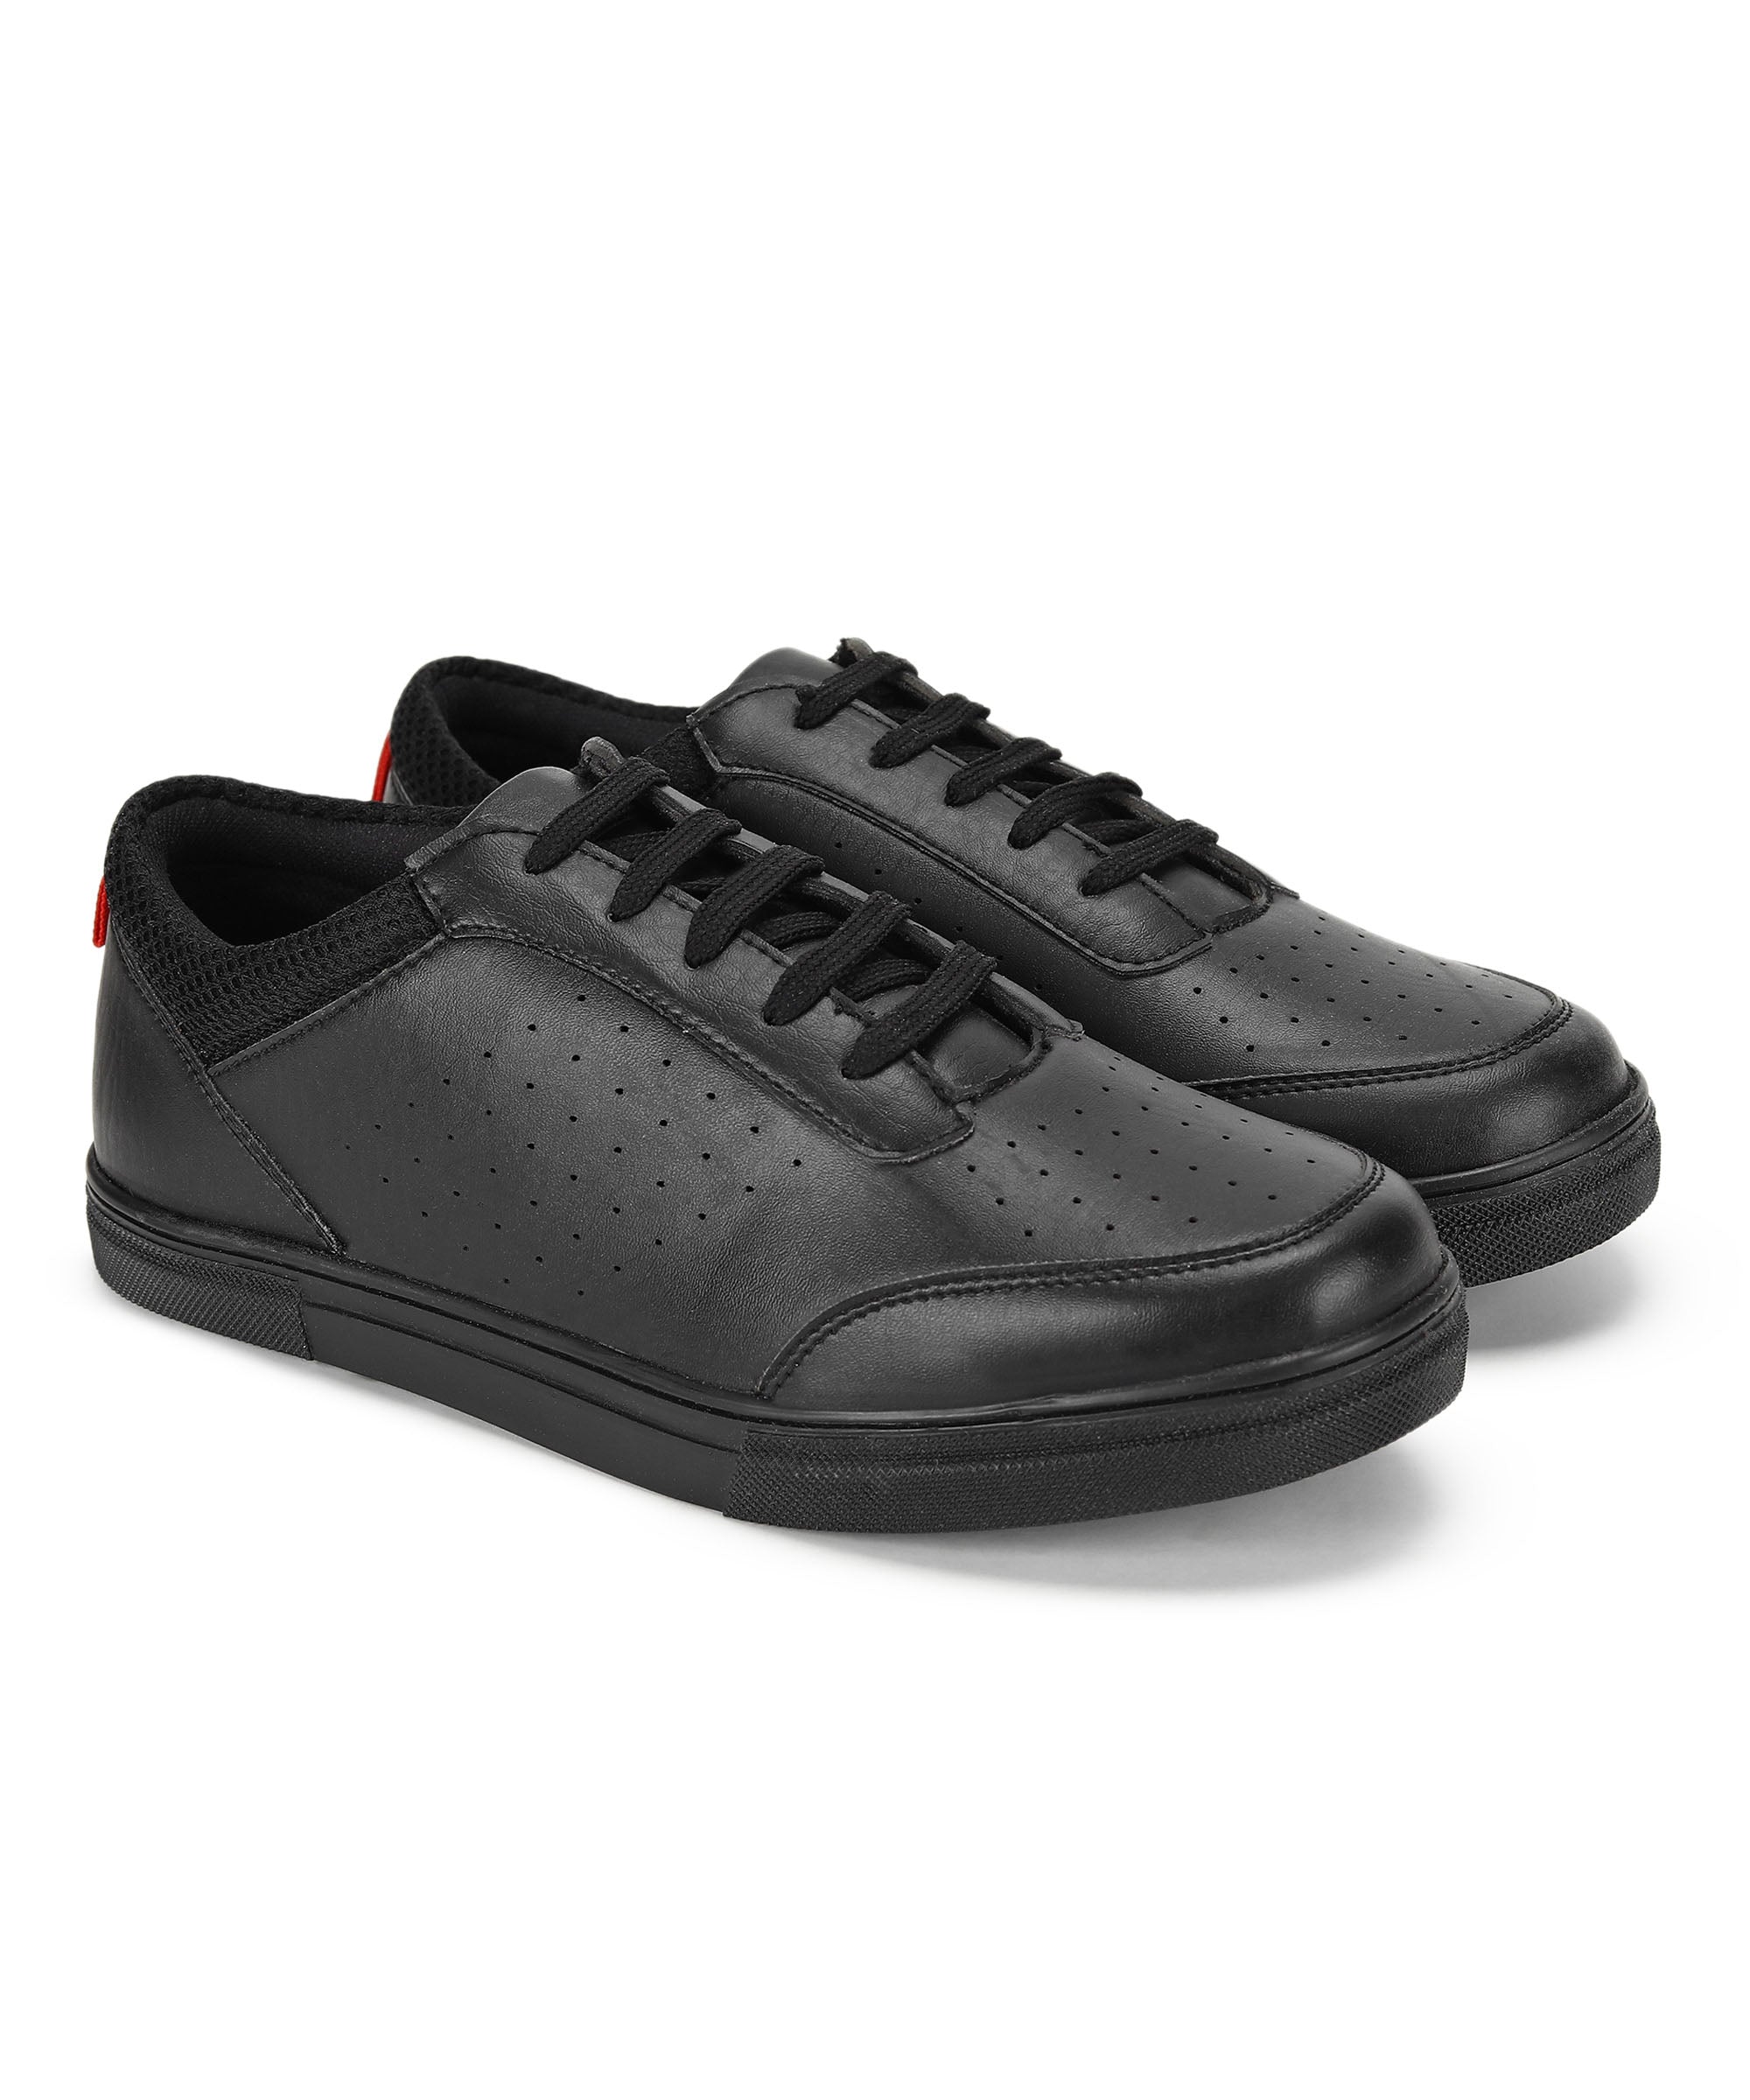 Paragon Max K1013G Men Casual Shoes | Stylish Walking Outdoor Shoes for Everyday Wear | Smart &amp; Trendy Design  | Comfortable Cushioned Soles Black